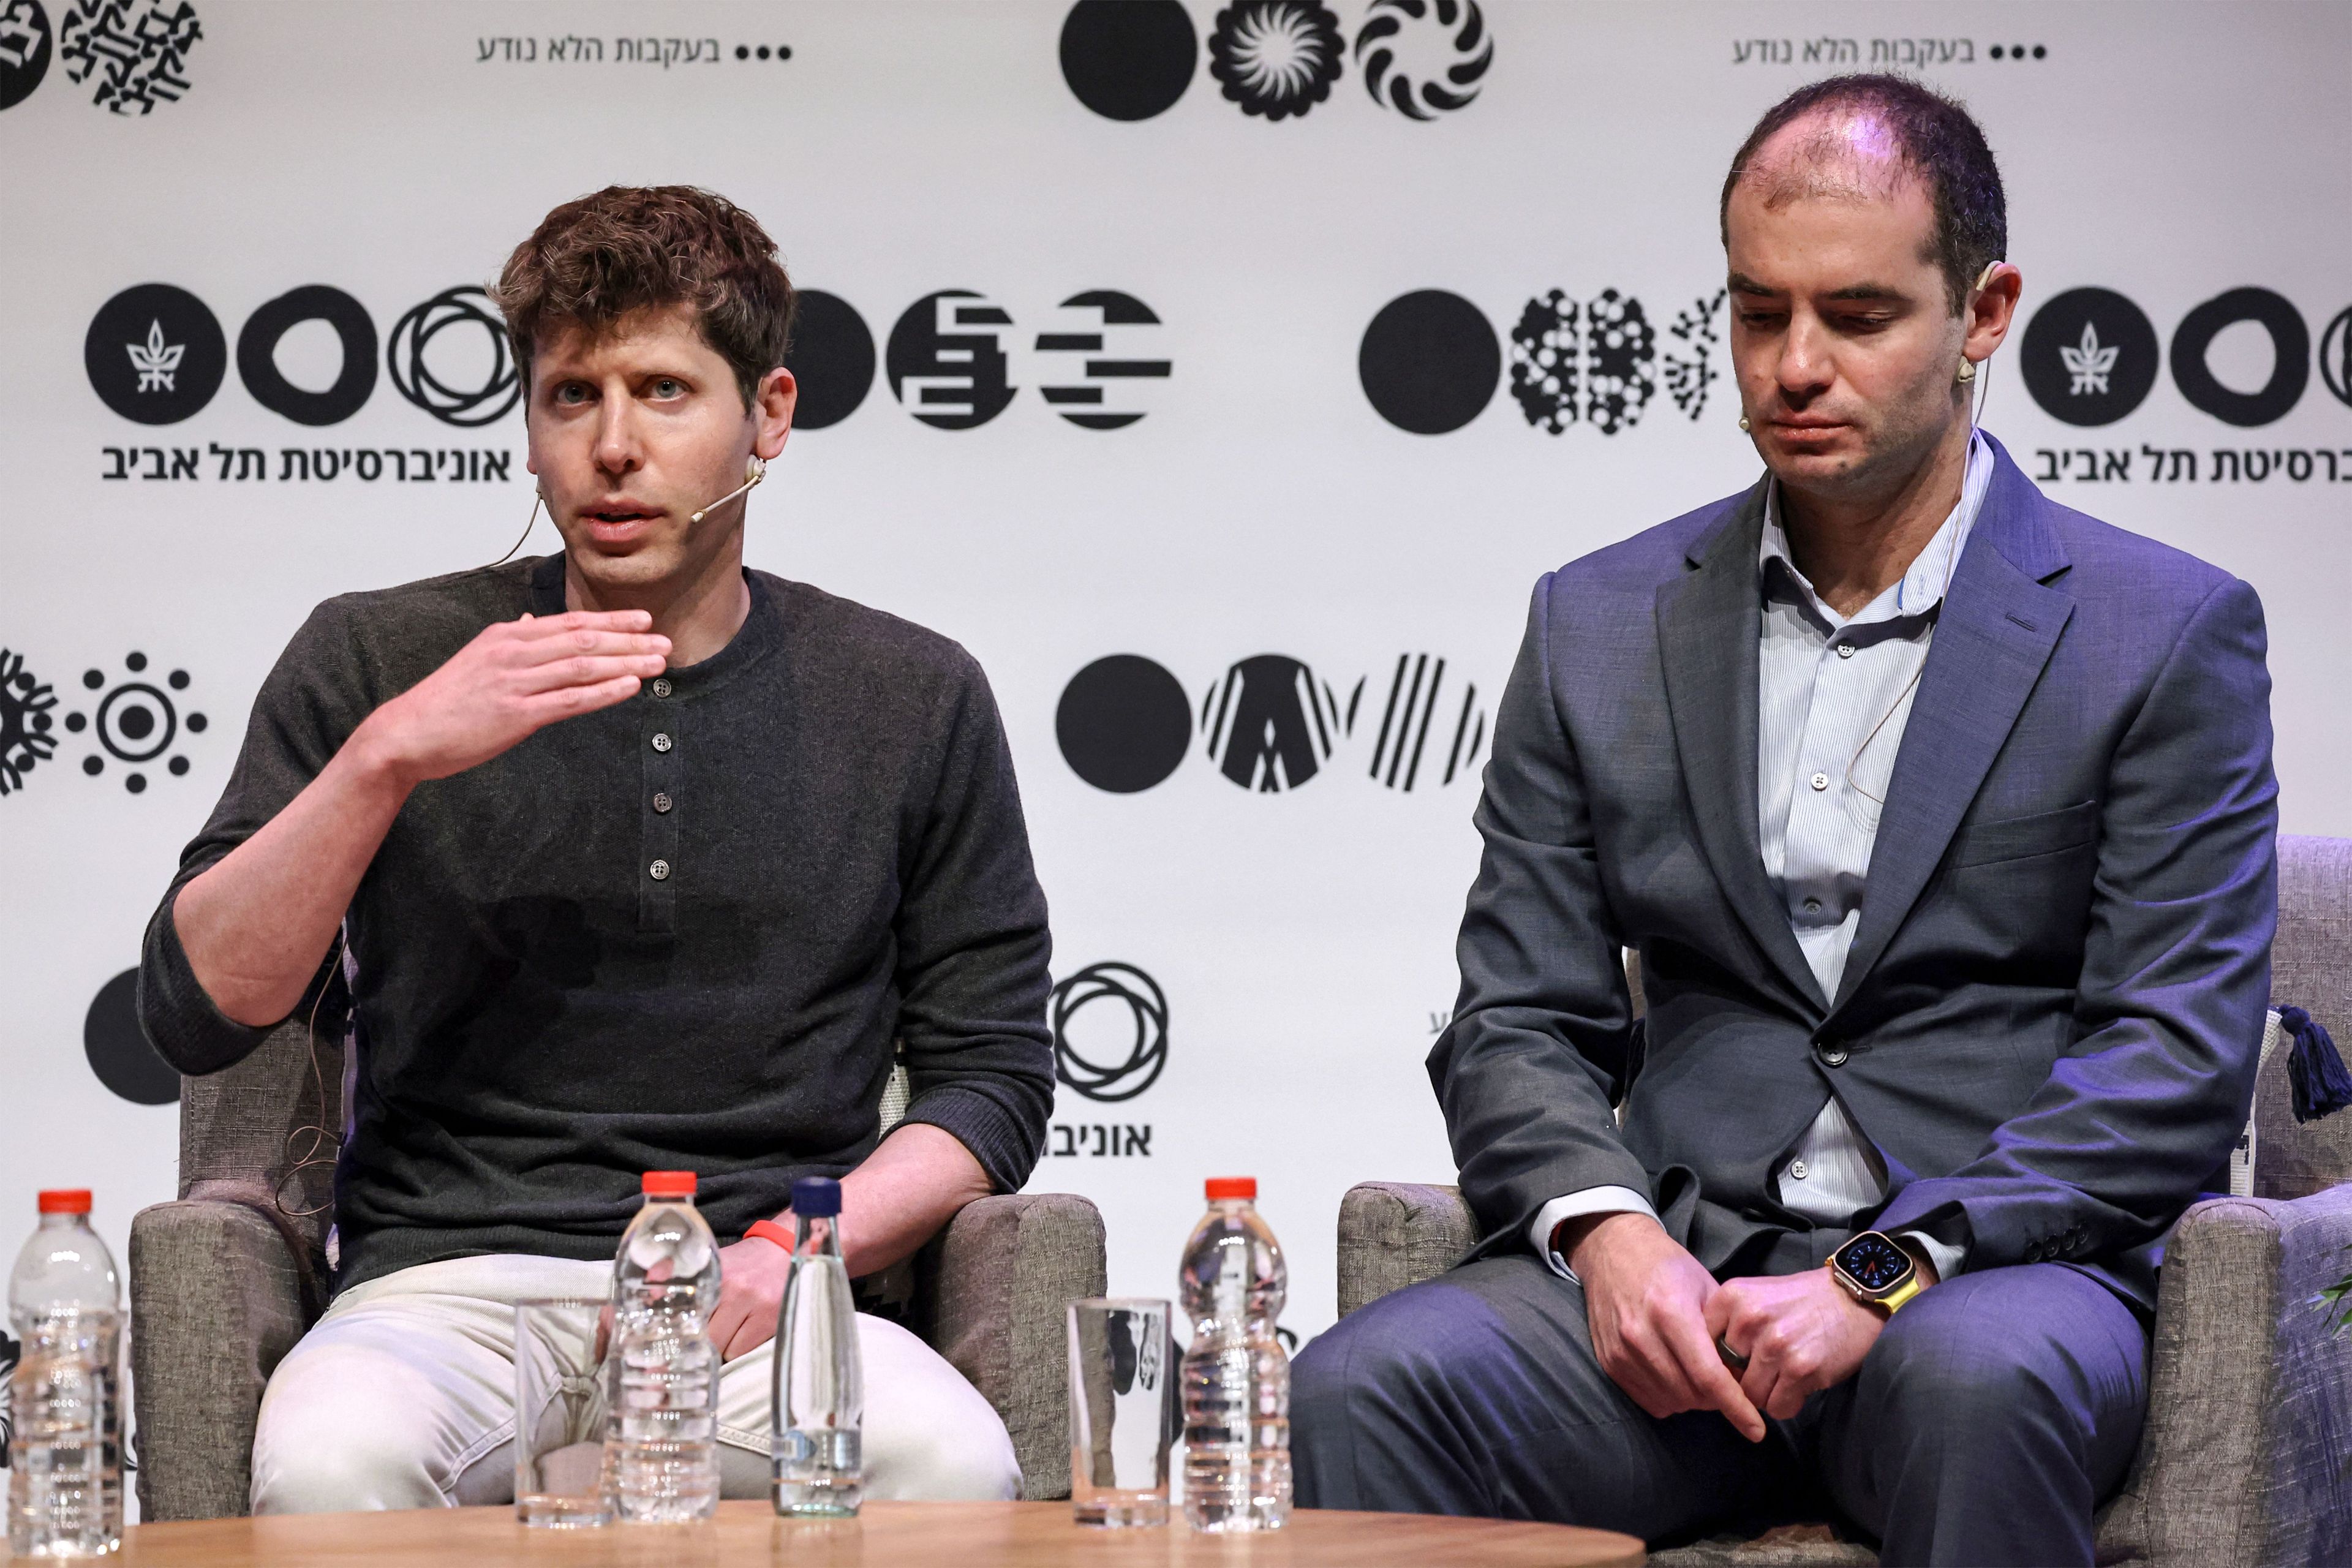 Sam Altman wears a gray shirt while talking at Tel Aviv University. His right arm is raised up. Ilya Sutskever, to Altman's left, is looking down.